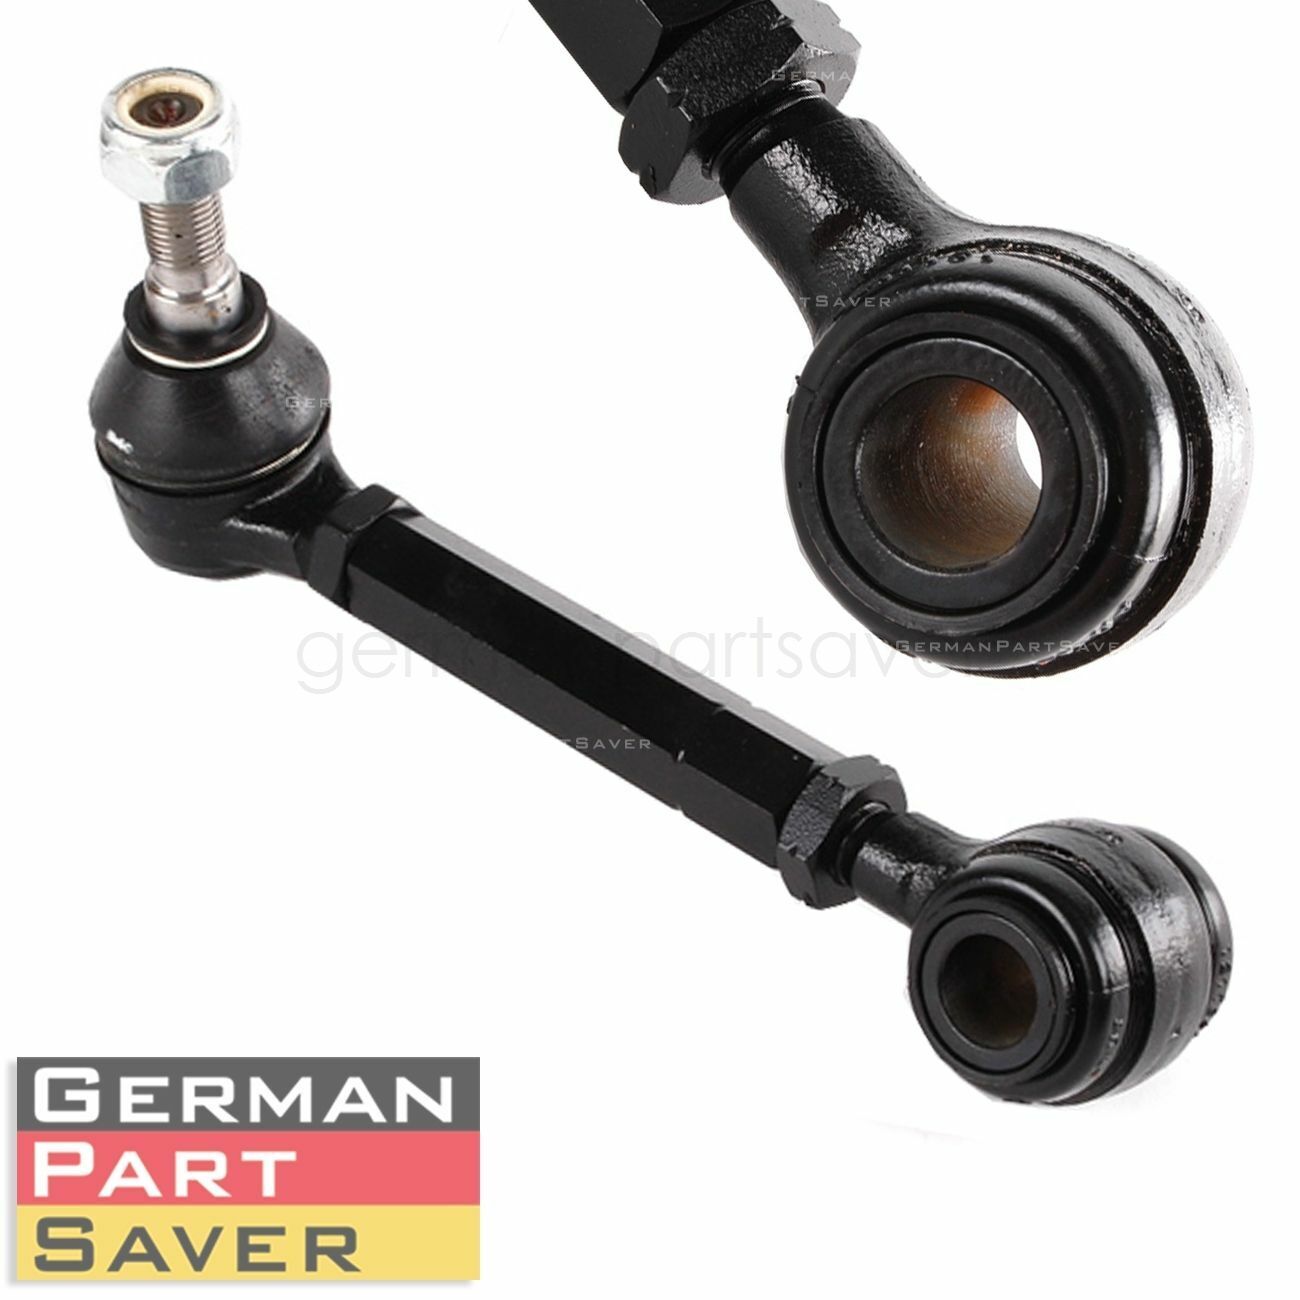 CONTROL ARM BALL JOINT for AUDI A6 100 200 5000 V8 QUATTRO S4 S6 443505351P